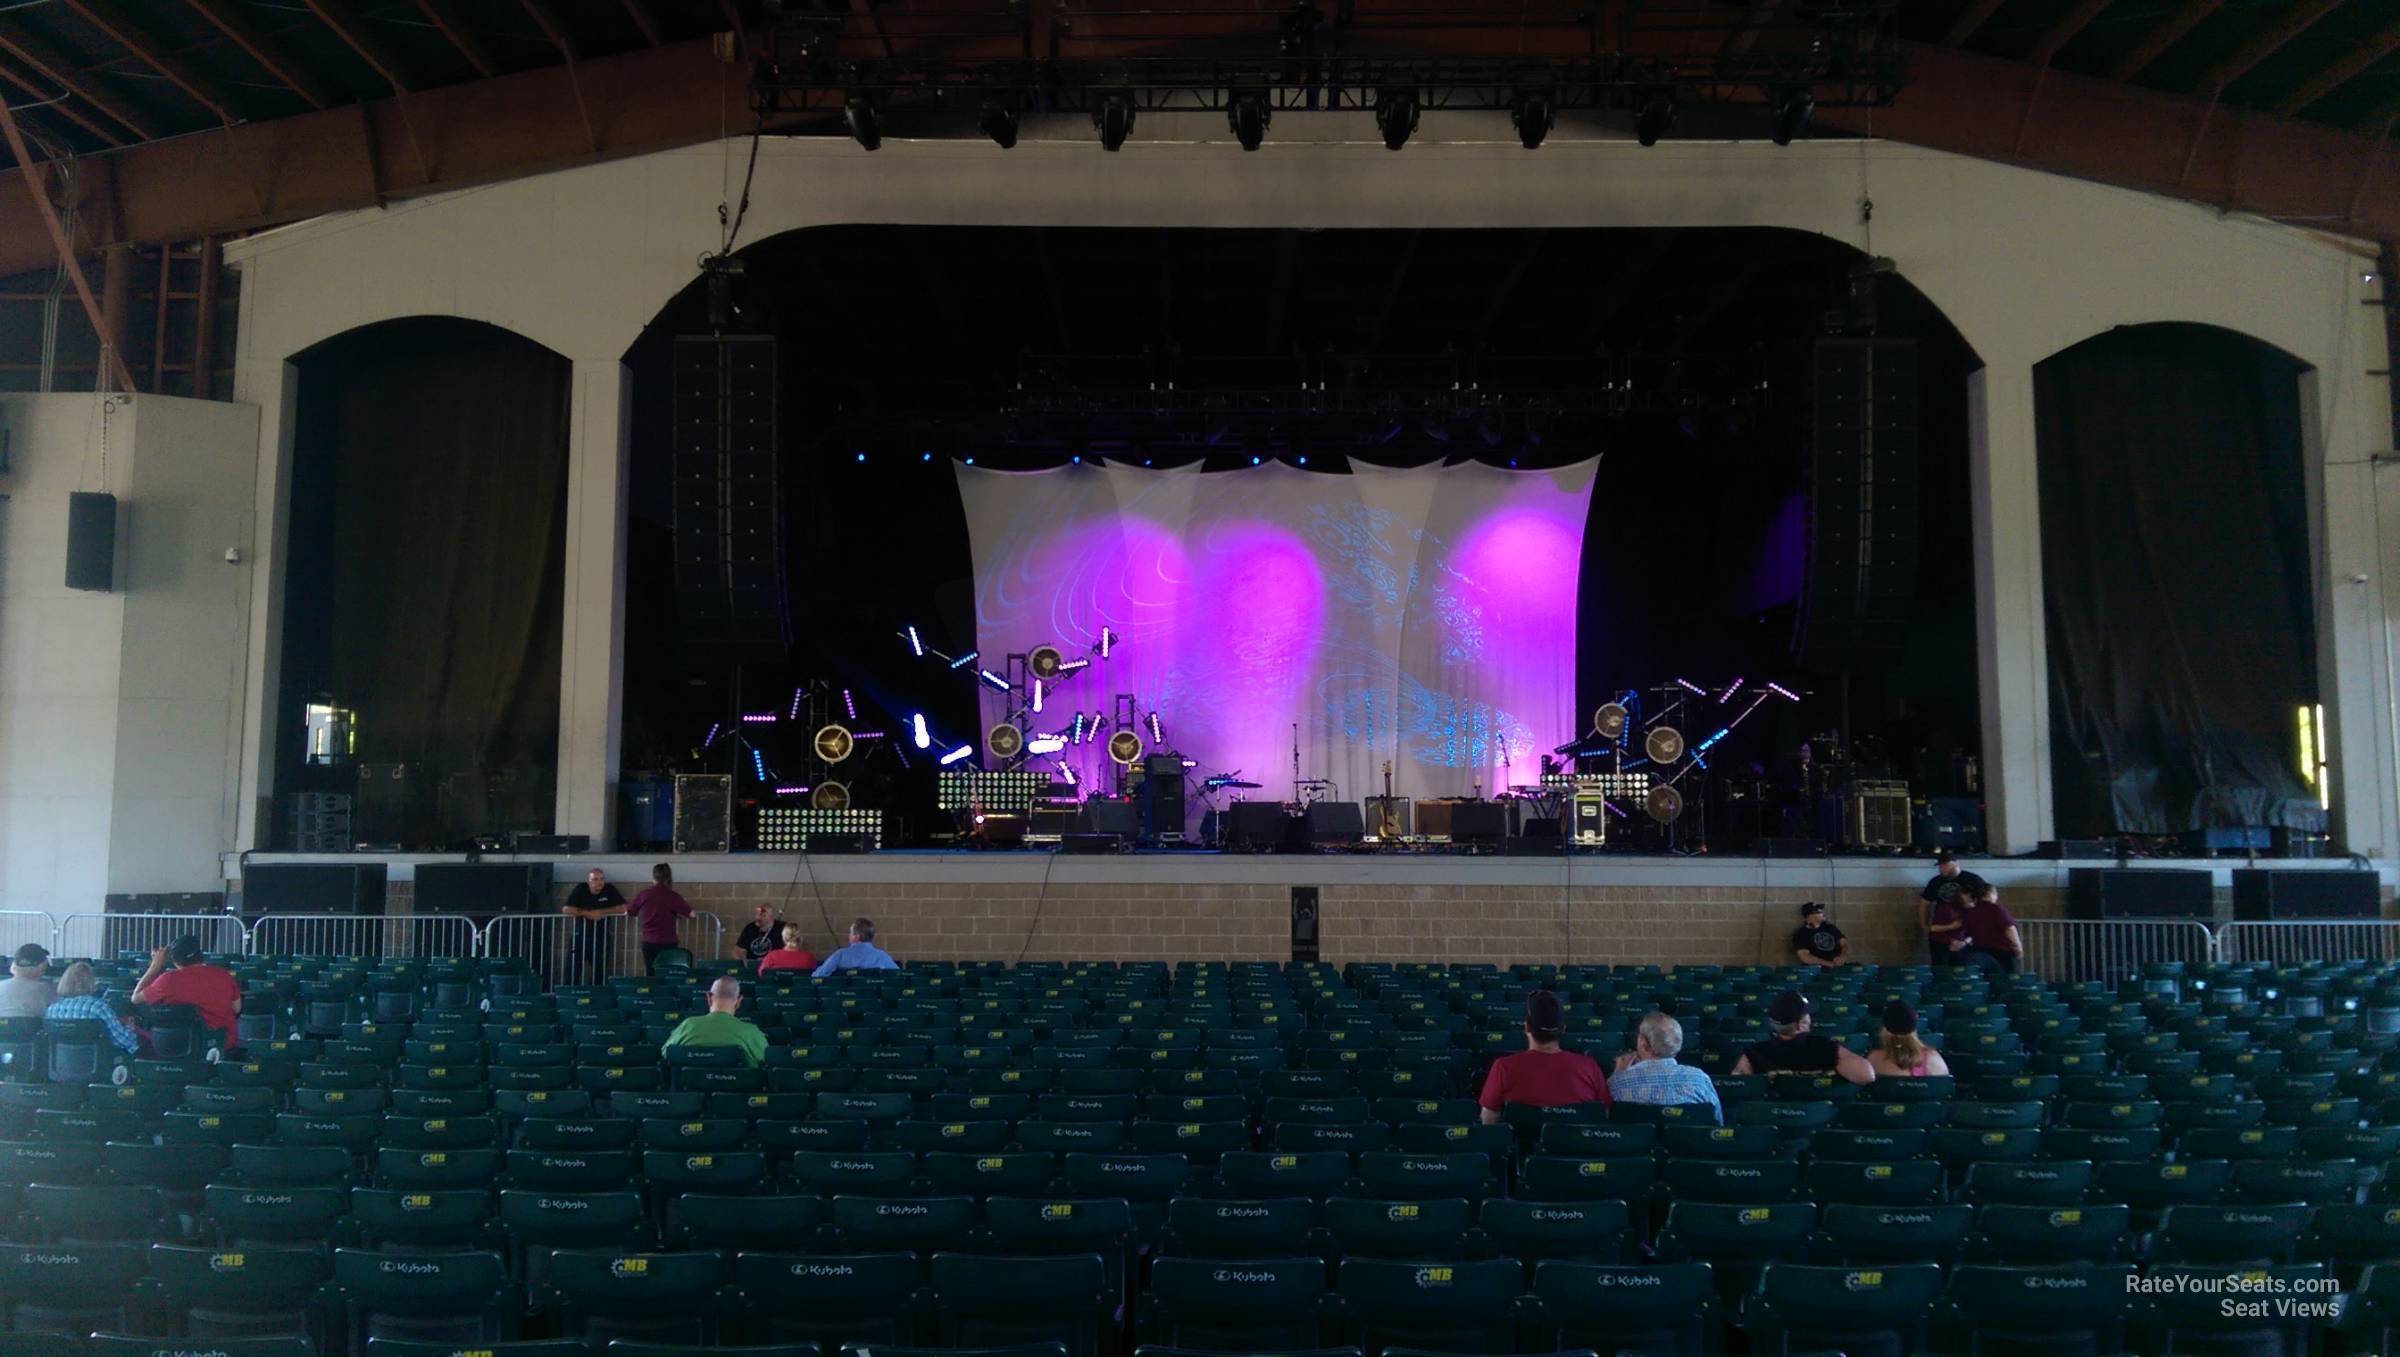 section 1b, row 20 seat view  - bank of new hampshire pavilion